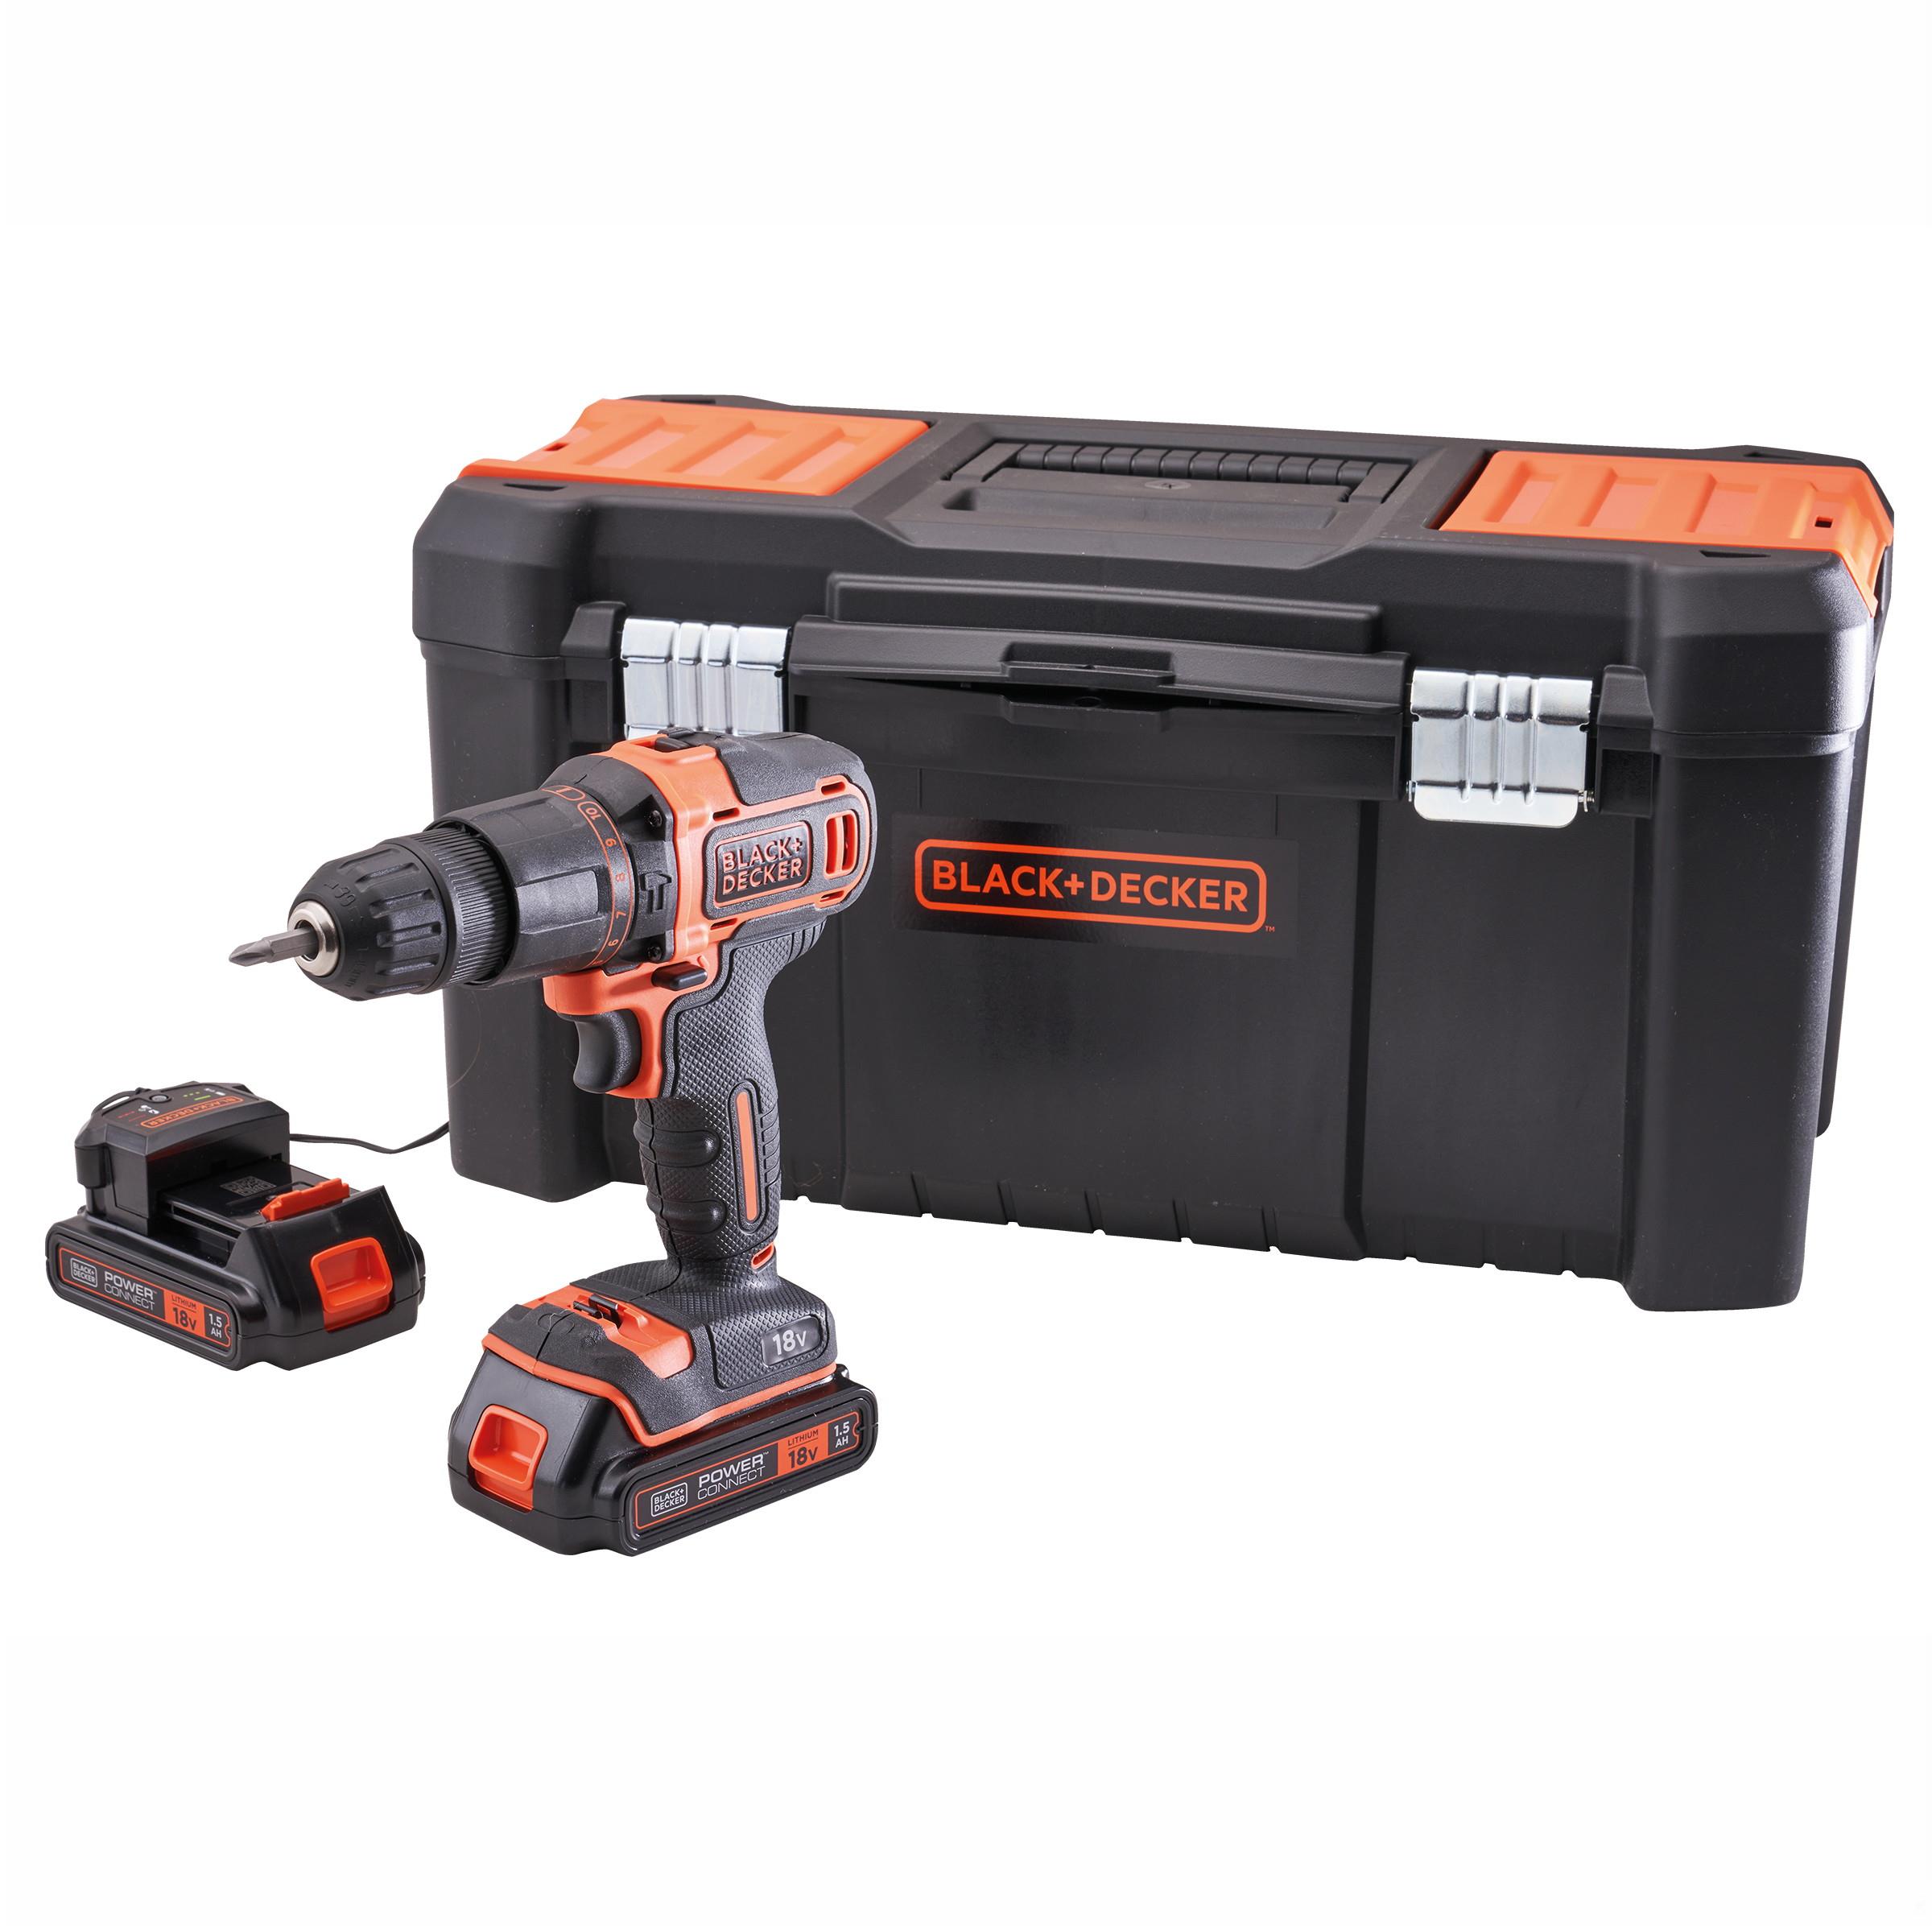 Black And Decker CHD18KB 18 Volt Combi Drill; Complete With 2 x 1.5 Ah Batteries; Charger; Kit Box & 120 Accessories